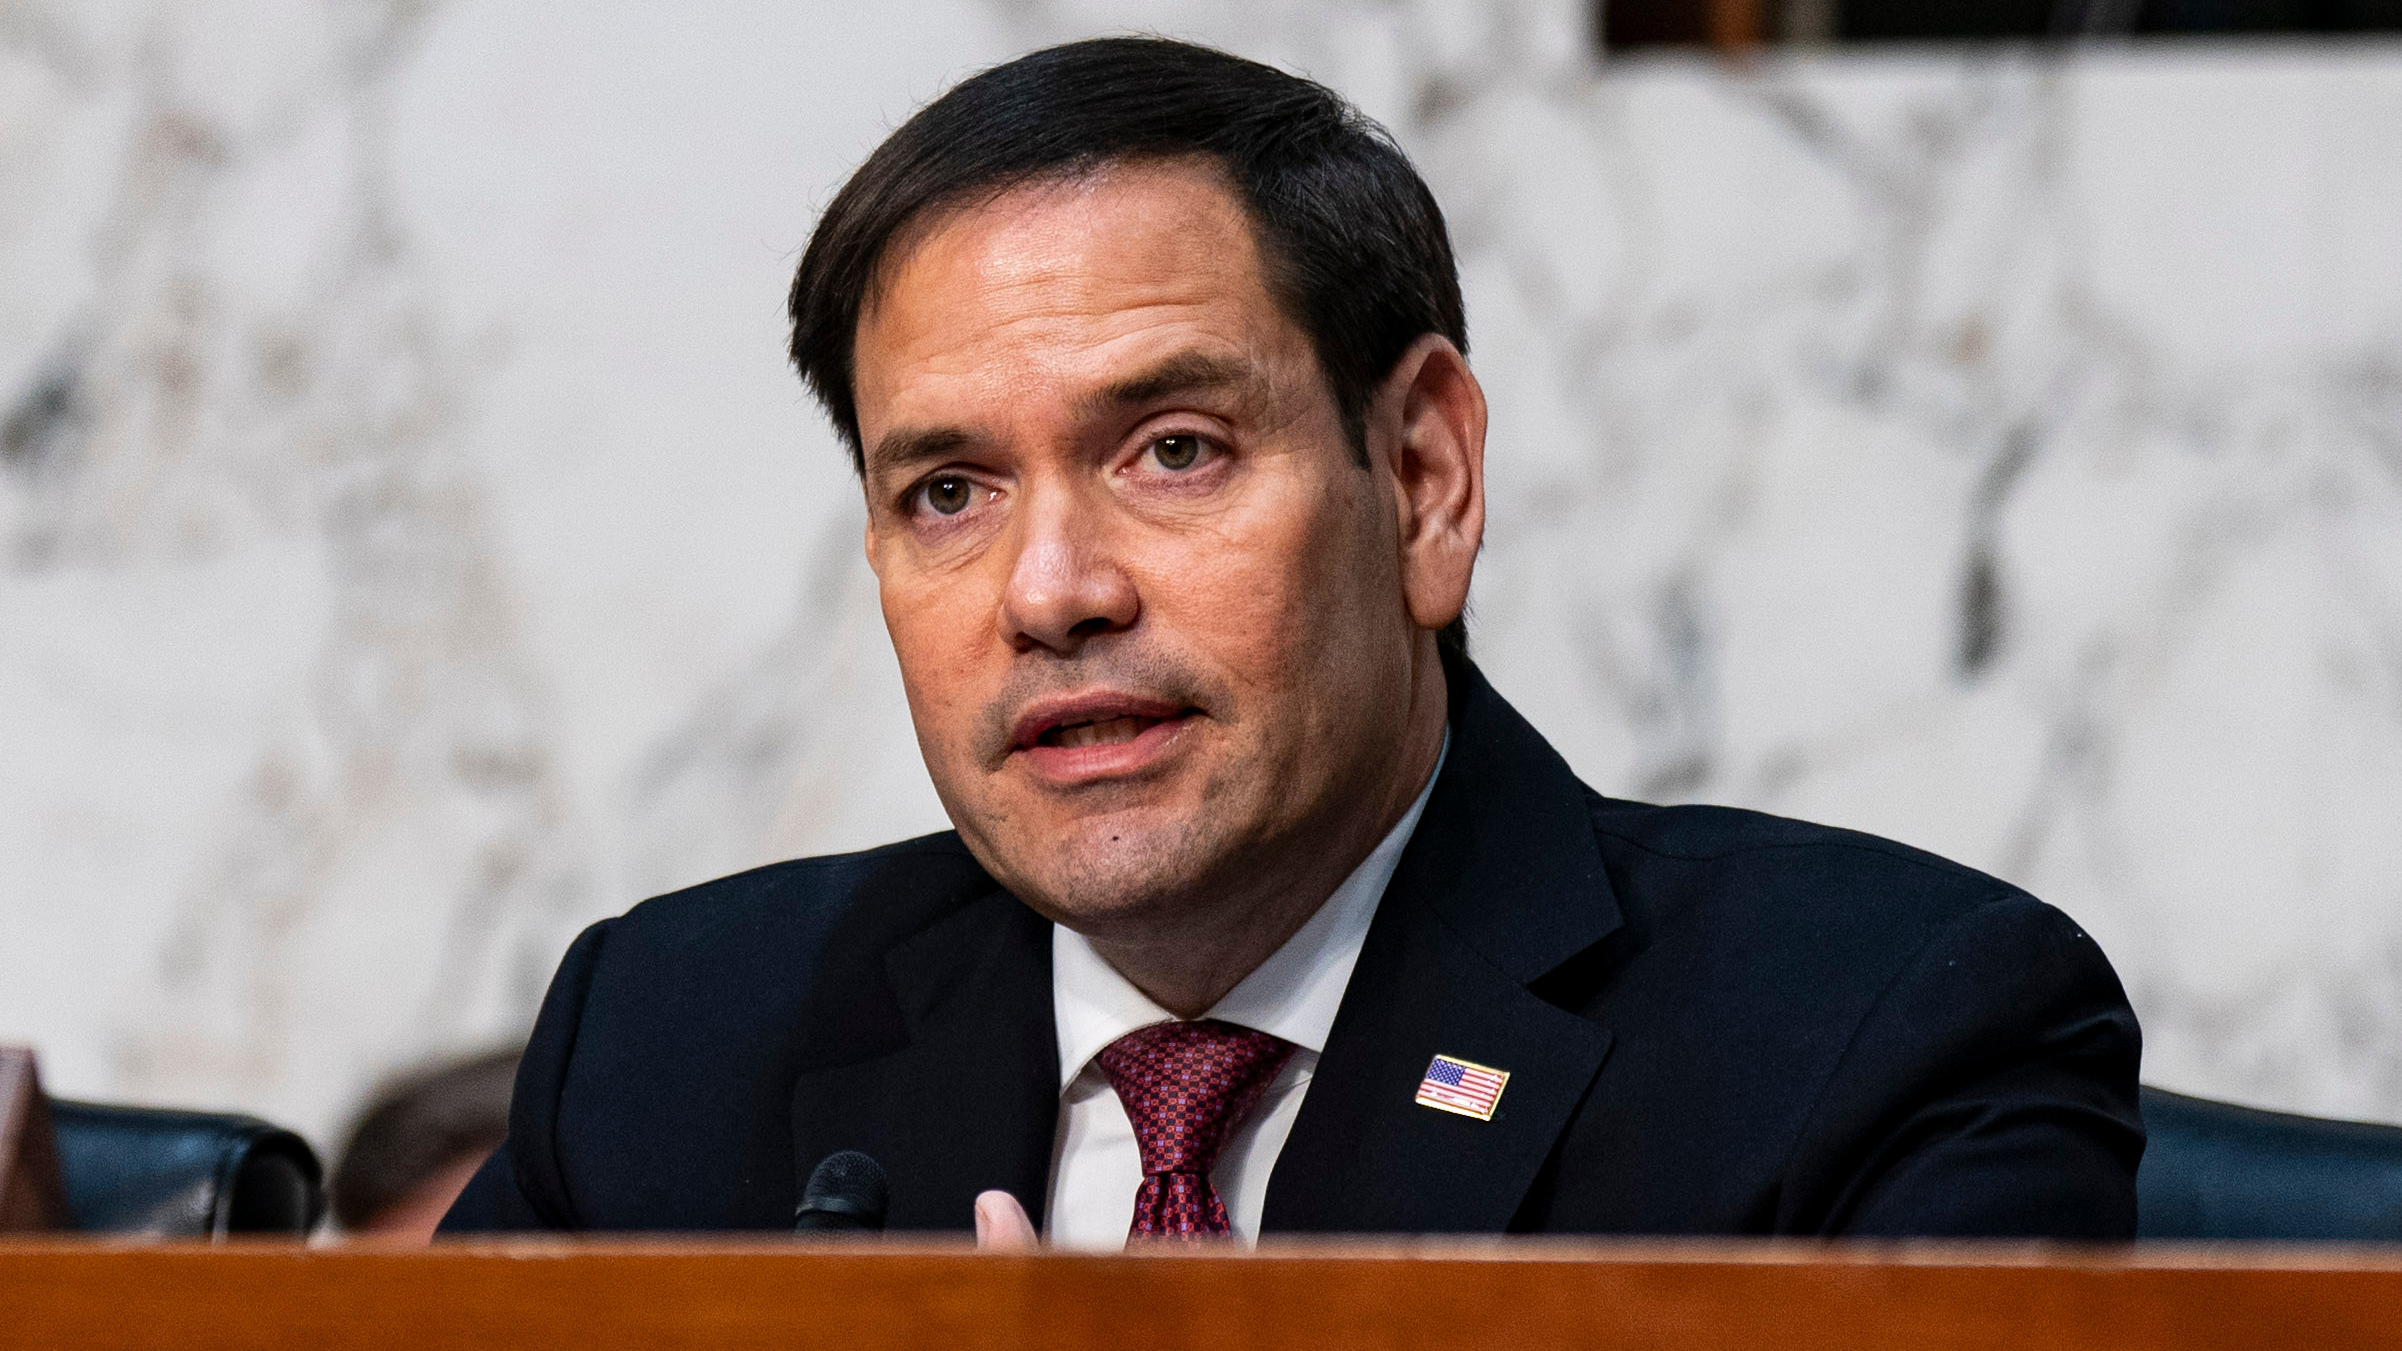 Rubio Backs Mass Deportation After Alleged Country Invasion